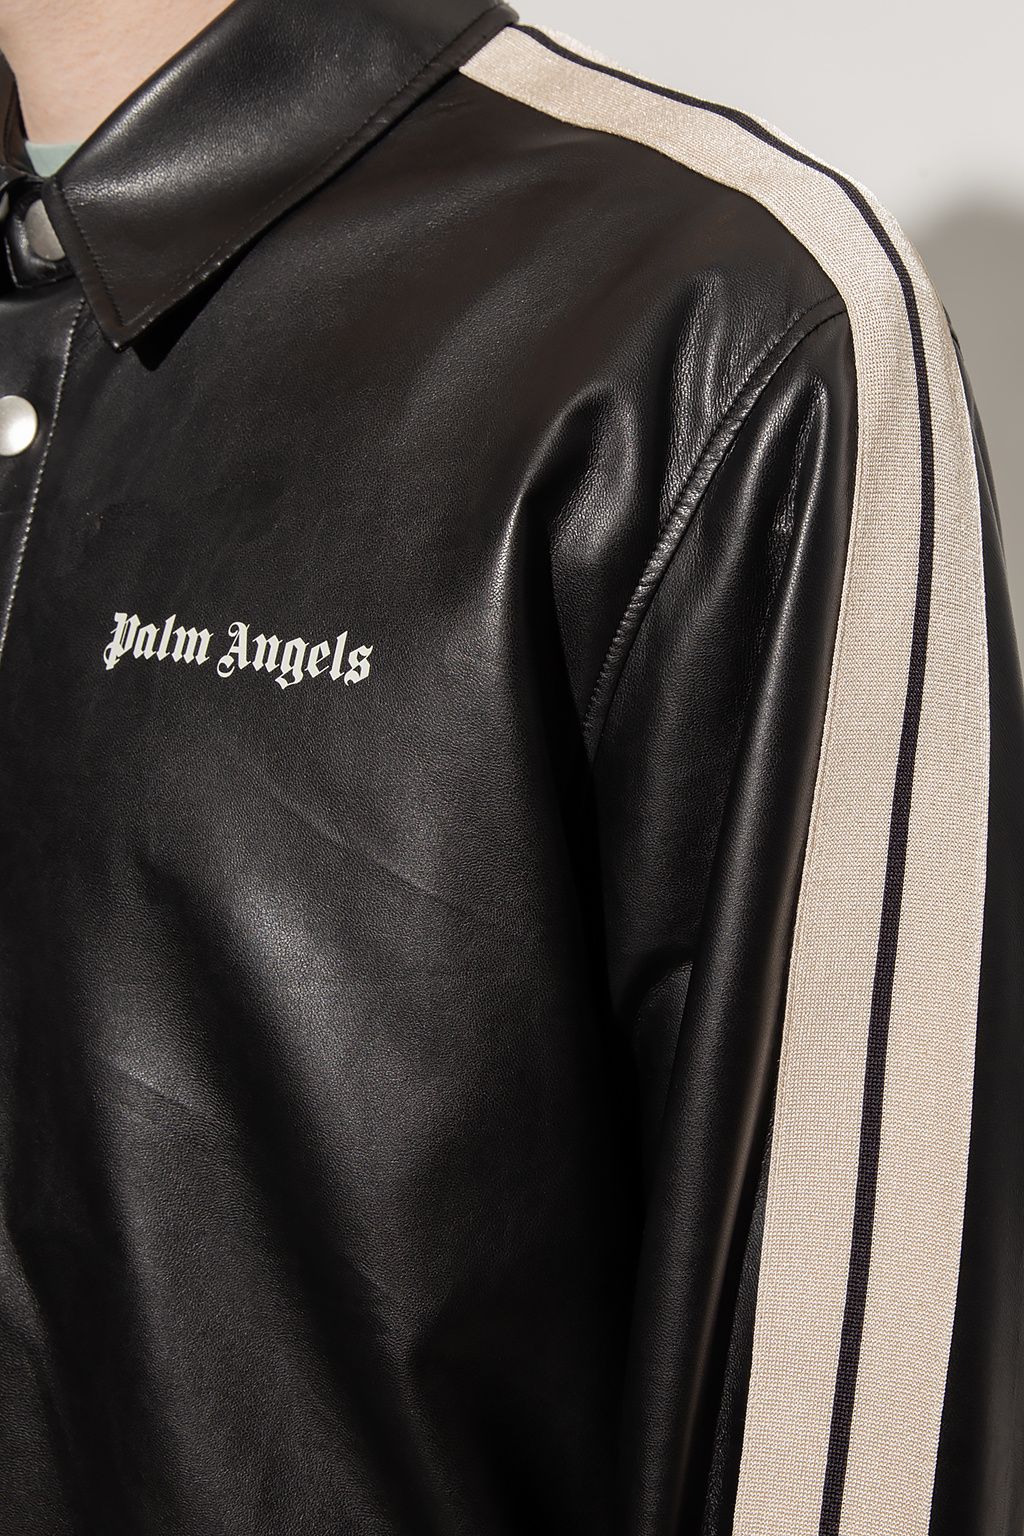 Palm Angels shirt Zegna with logo